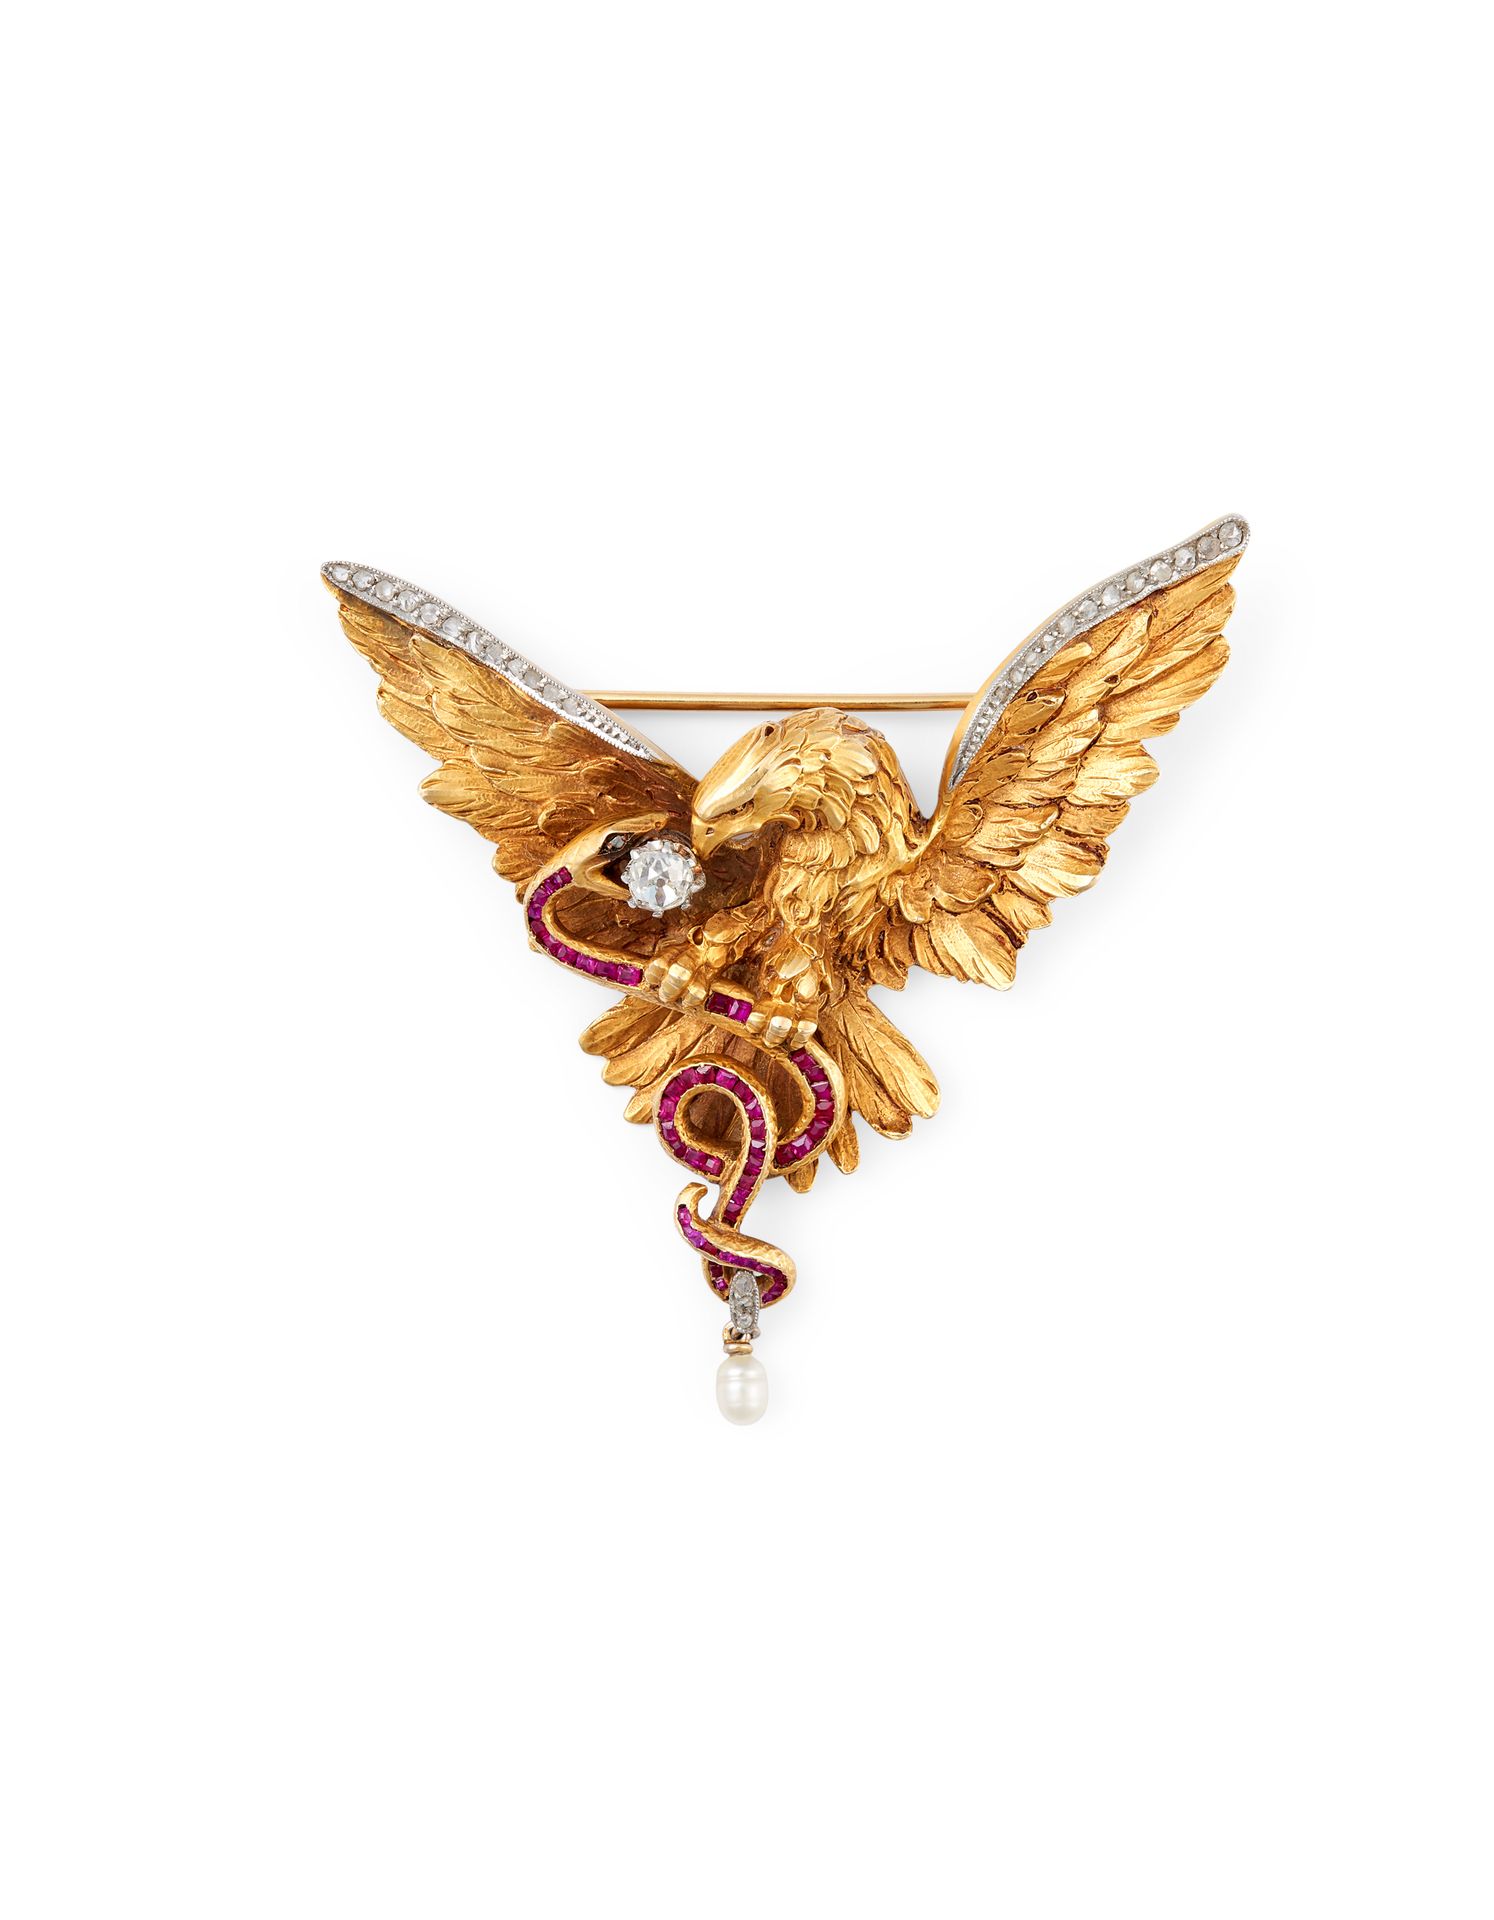 Null ART NOUVEAU EAGLE BROOCH In 18K white and yellow gold, the spread wings set&hellip;